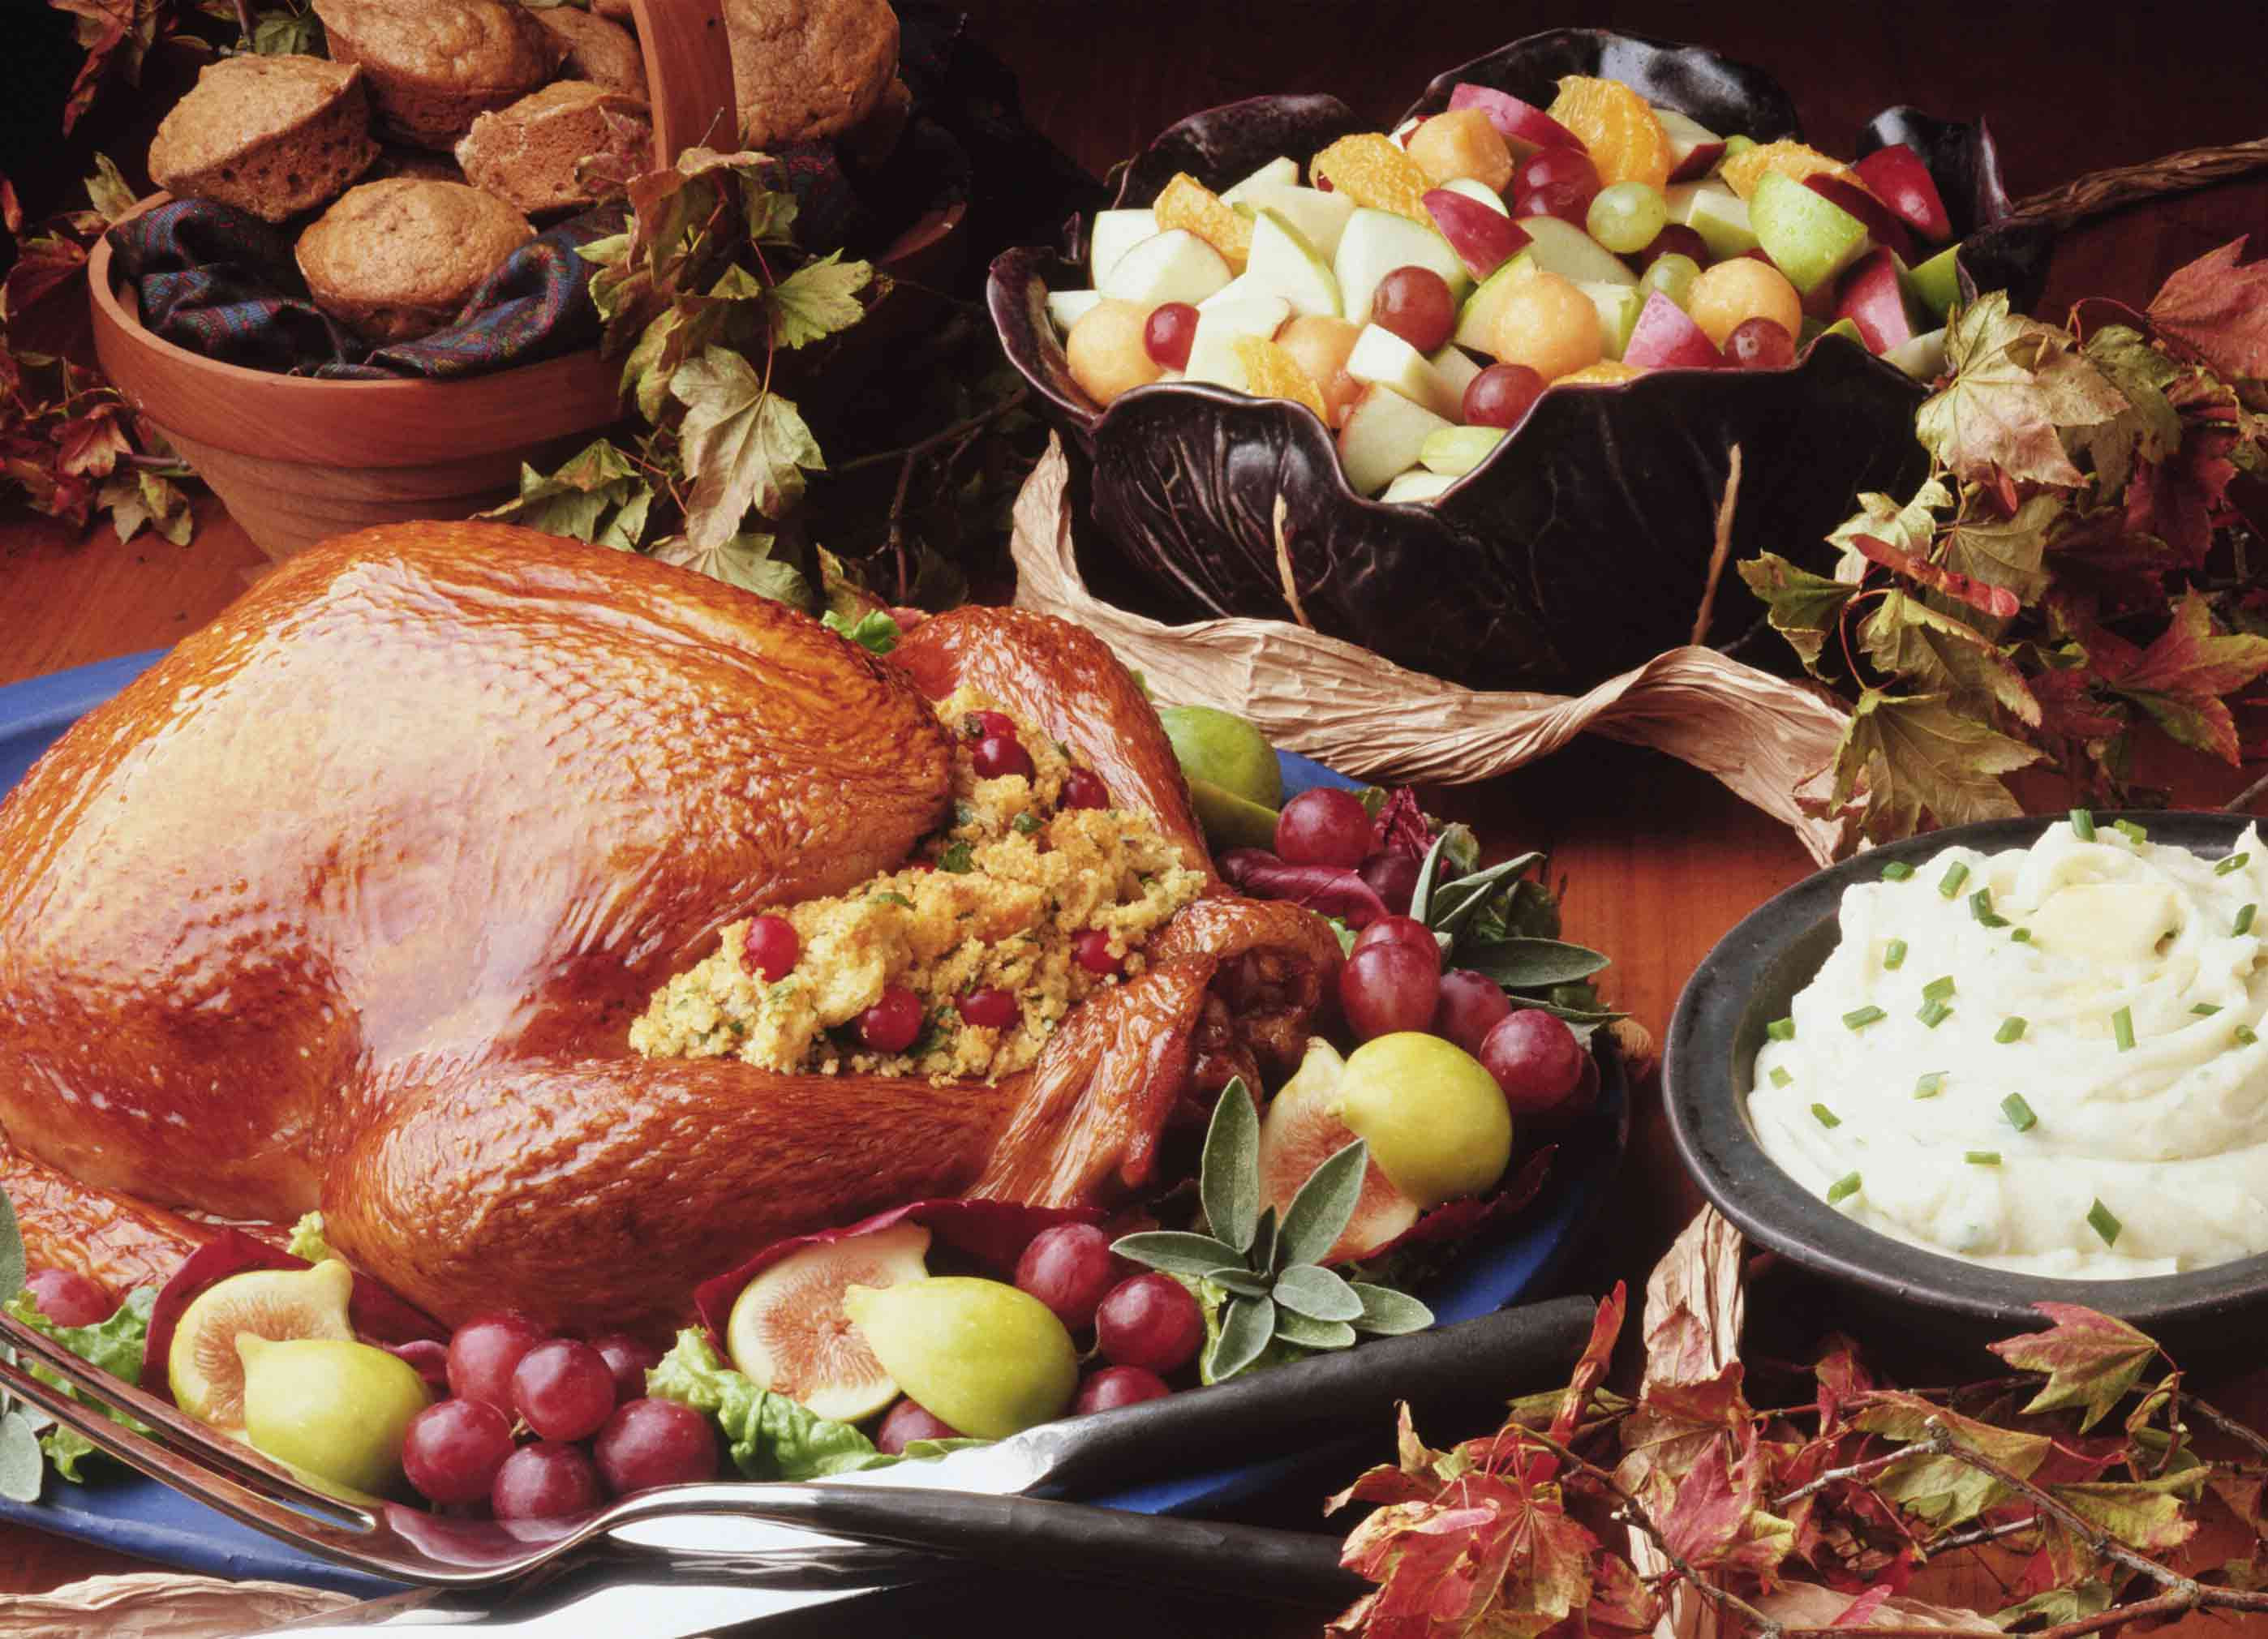 30 Of the Best Ideas for Restaurants that Have Thanksgiving Dinner